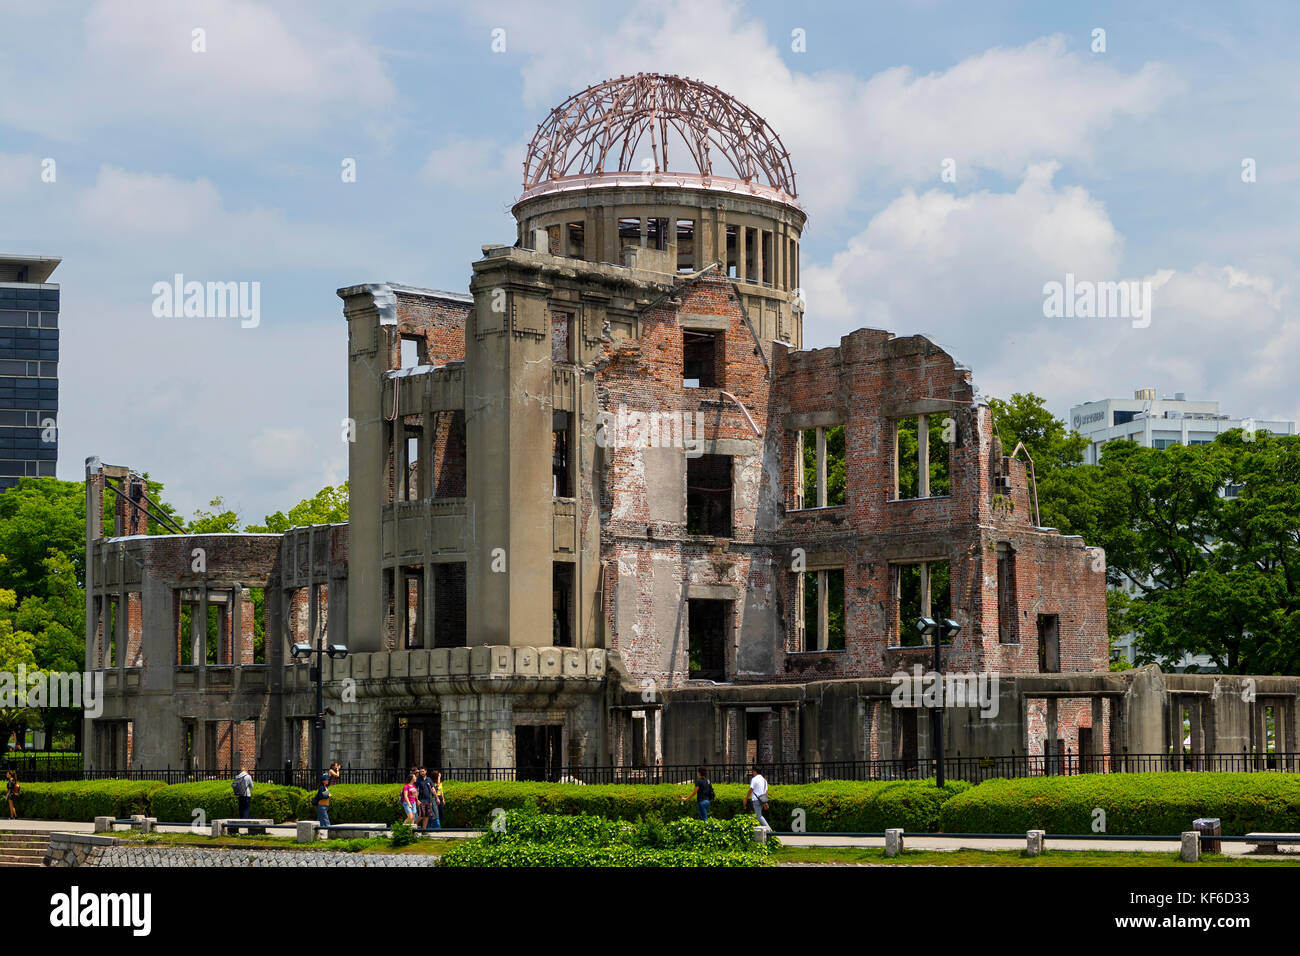 Hiroshima, Japan - May 25, 2017:  The skeletal ruins of the former Hiroshima Prefectural Industrial Promotion Hall, the A-Bomb Dome Stock Photo